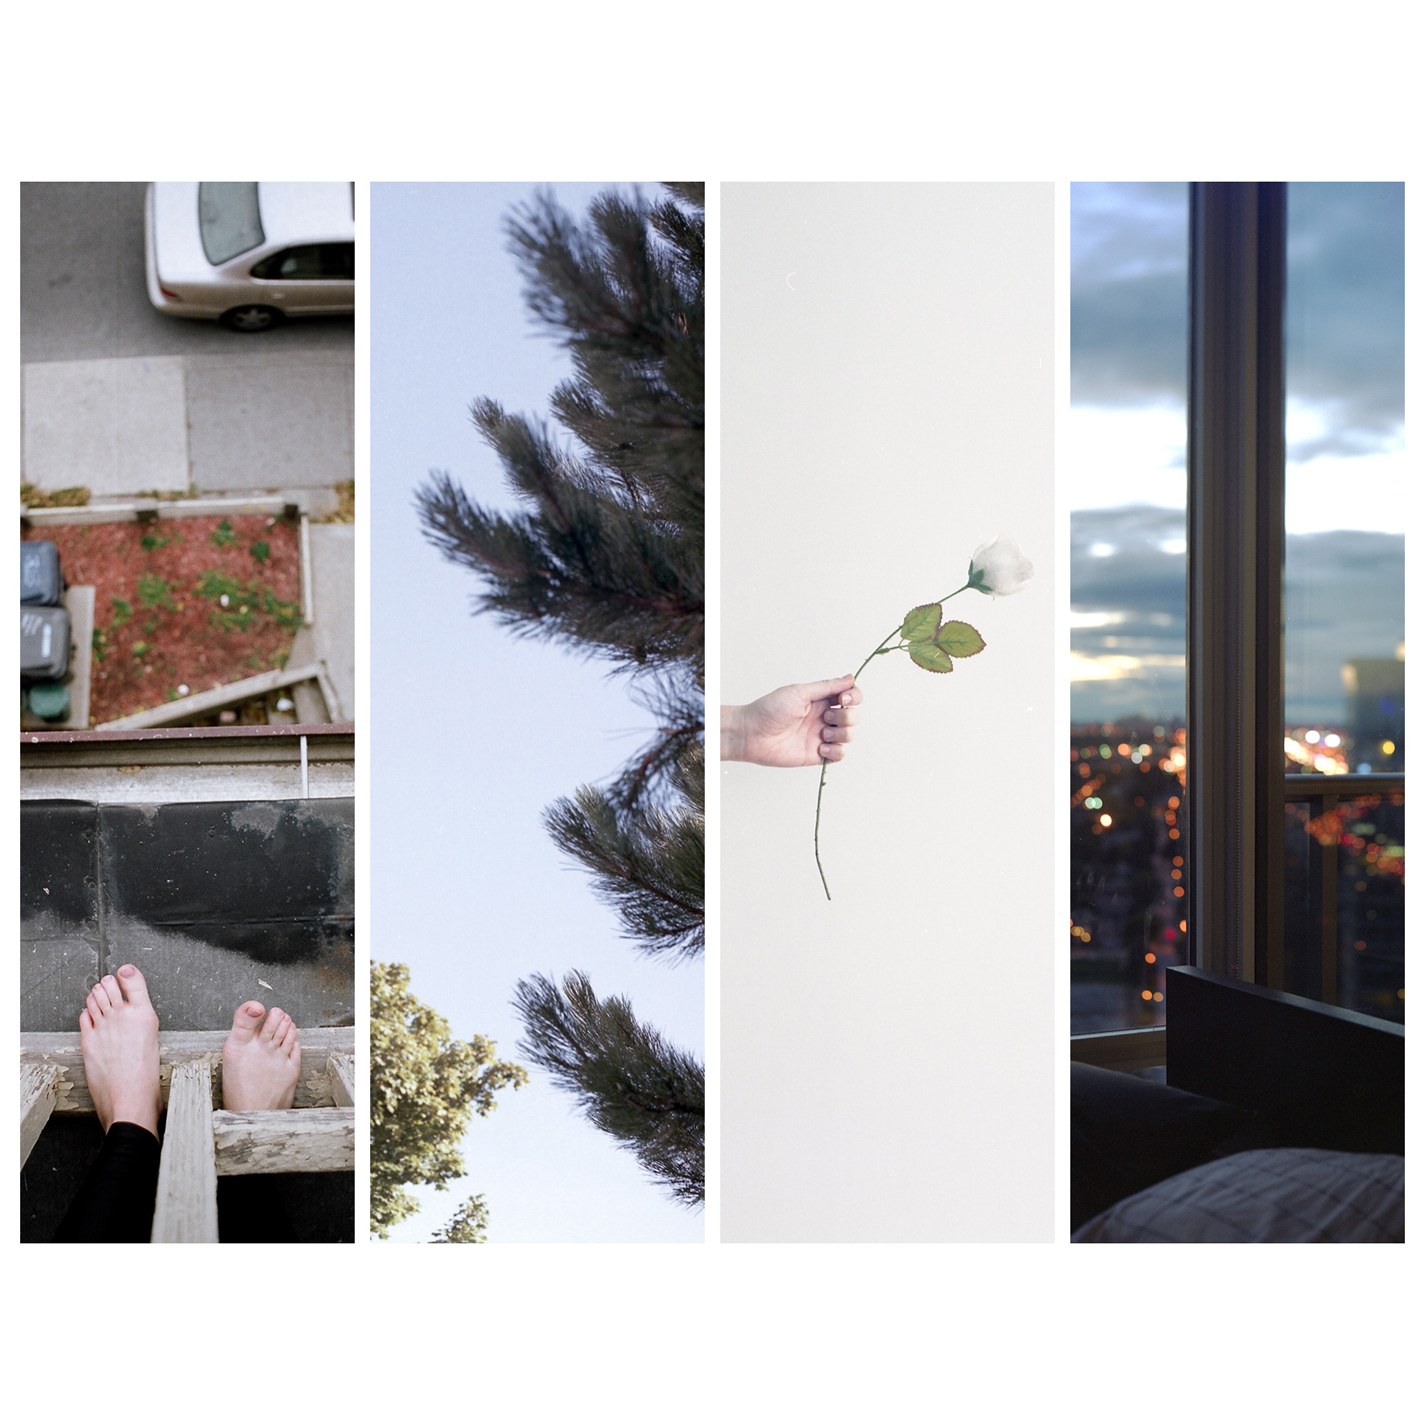 Counterparts – The Difference Between Hell And Home